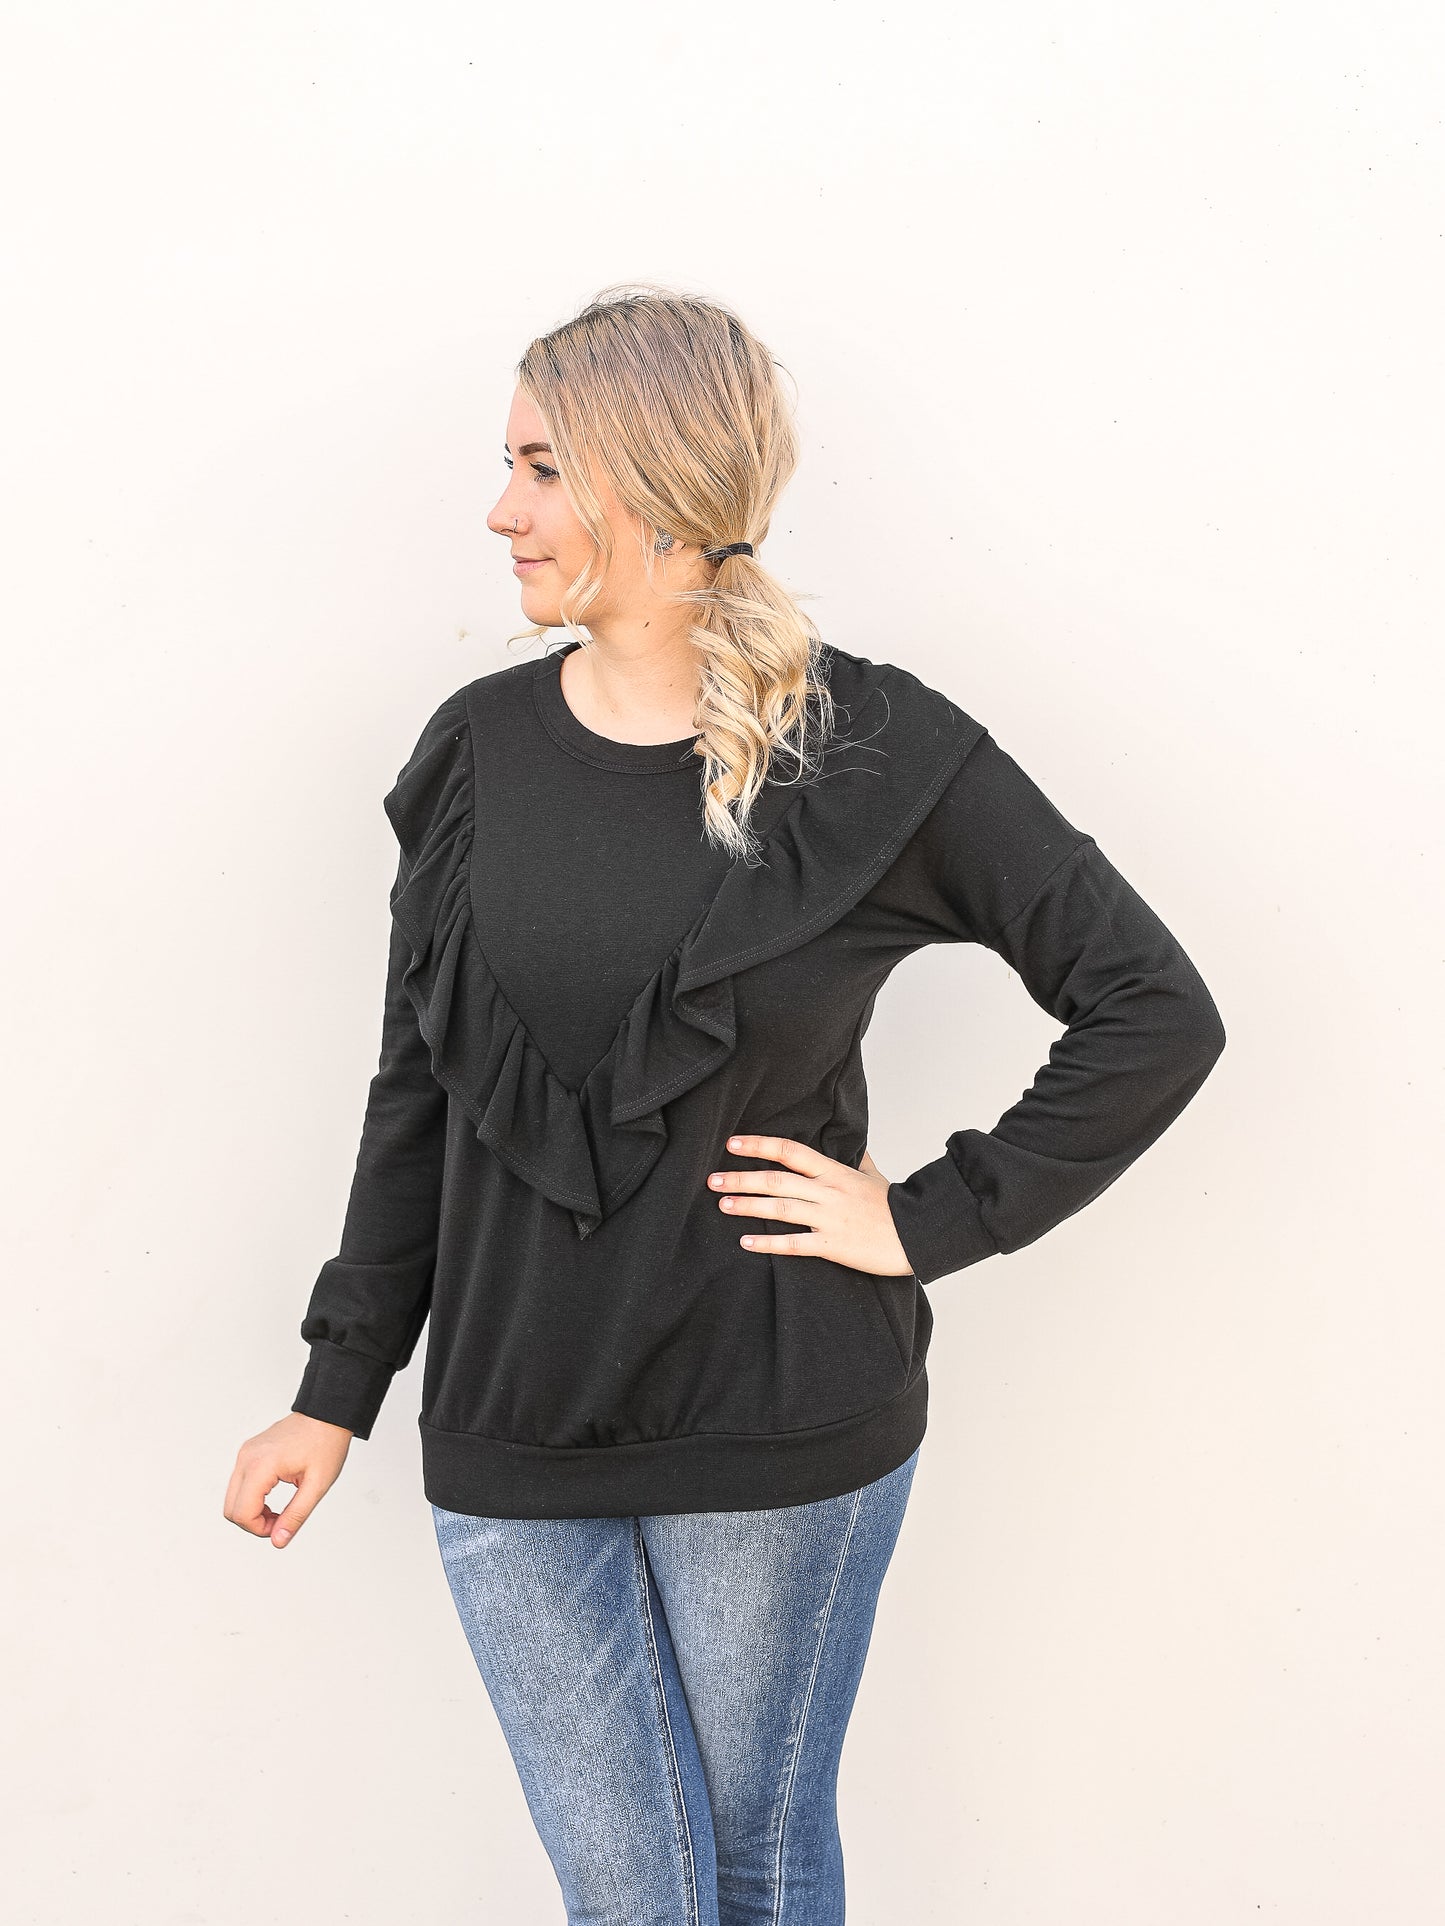 Ruffled black long sleeve top paired with jeans